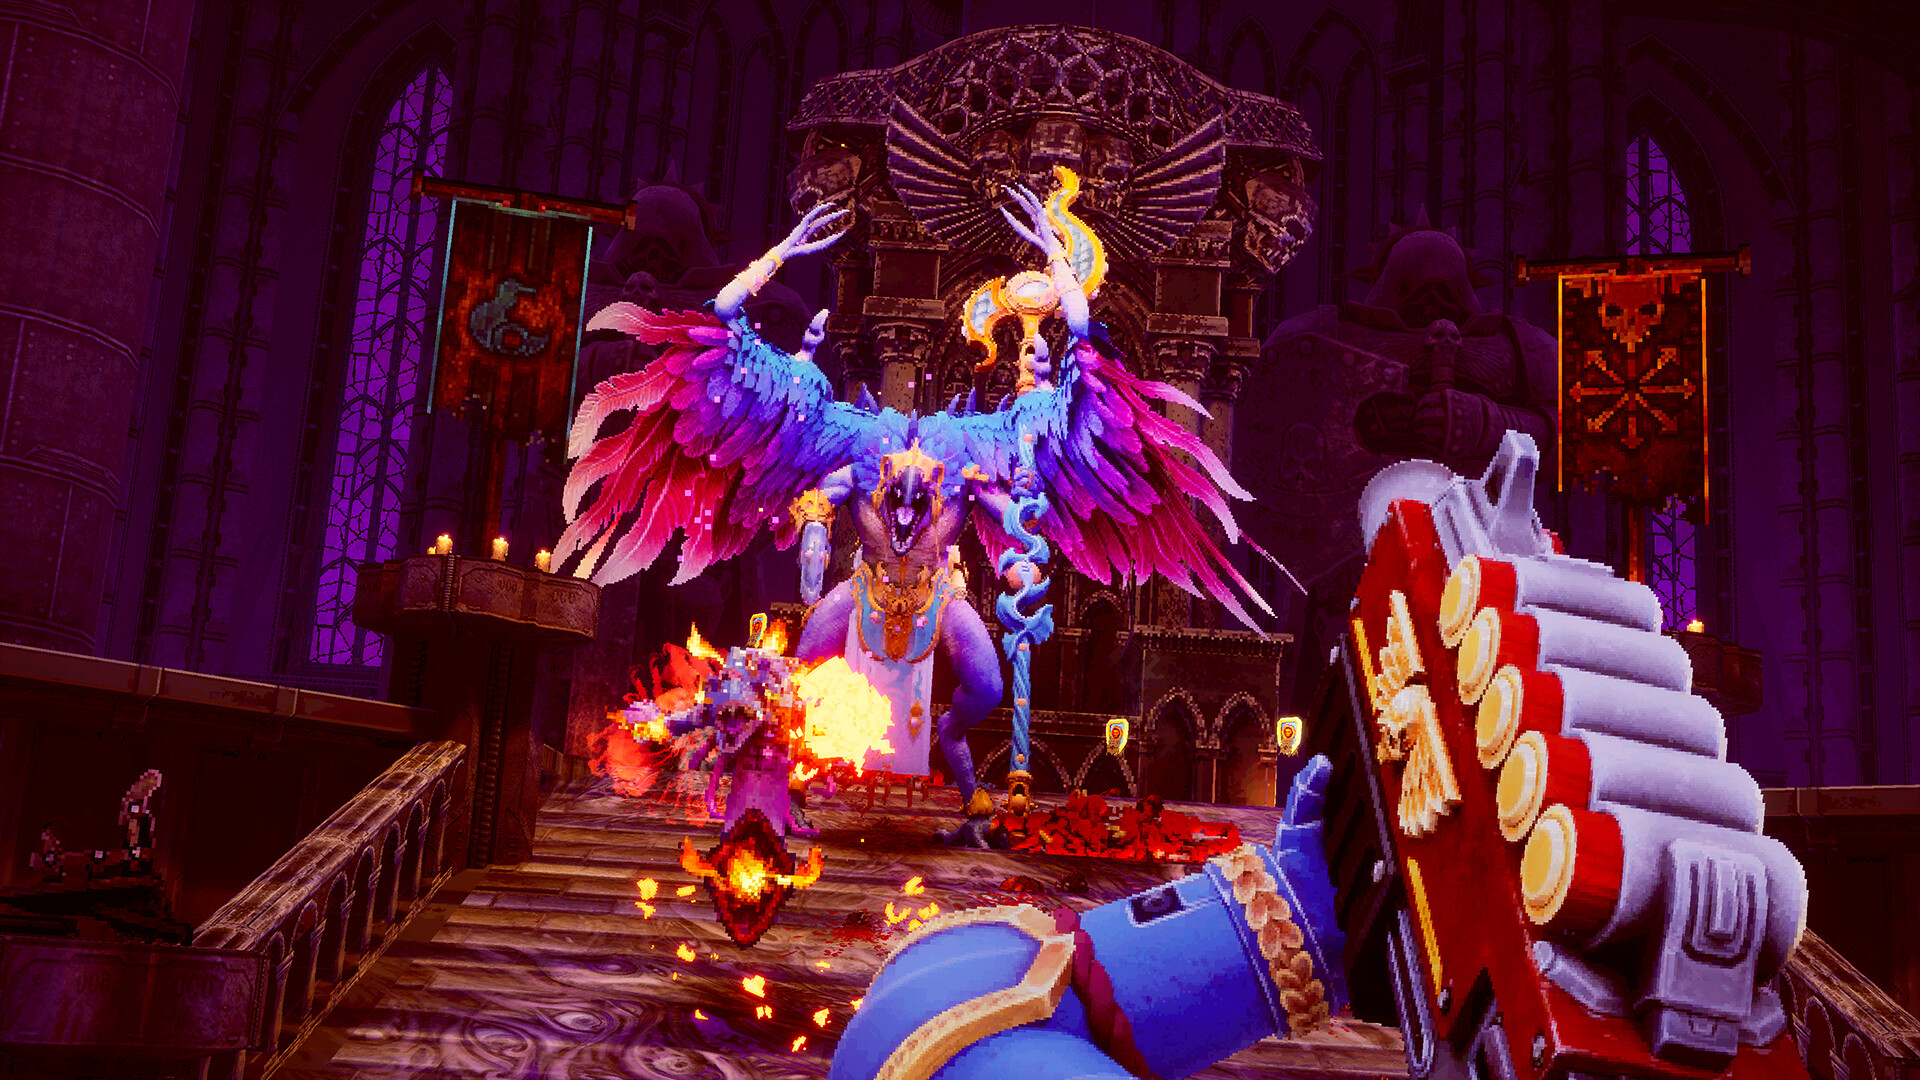 A screenshot from Warhammer 40,000: Boltgun, where the protagonist is attacking a bird-like demon known as a Lord of Change from the first-person perspective.